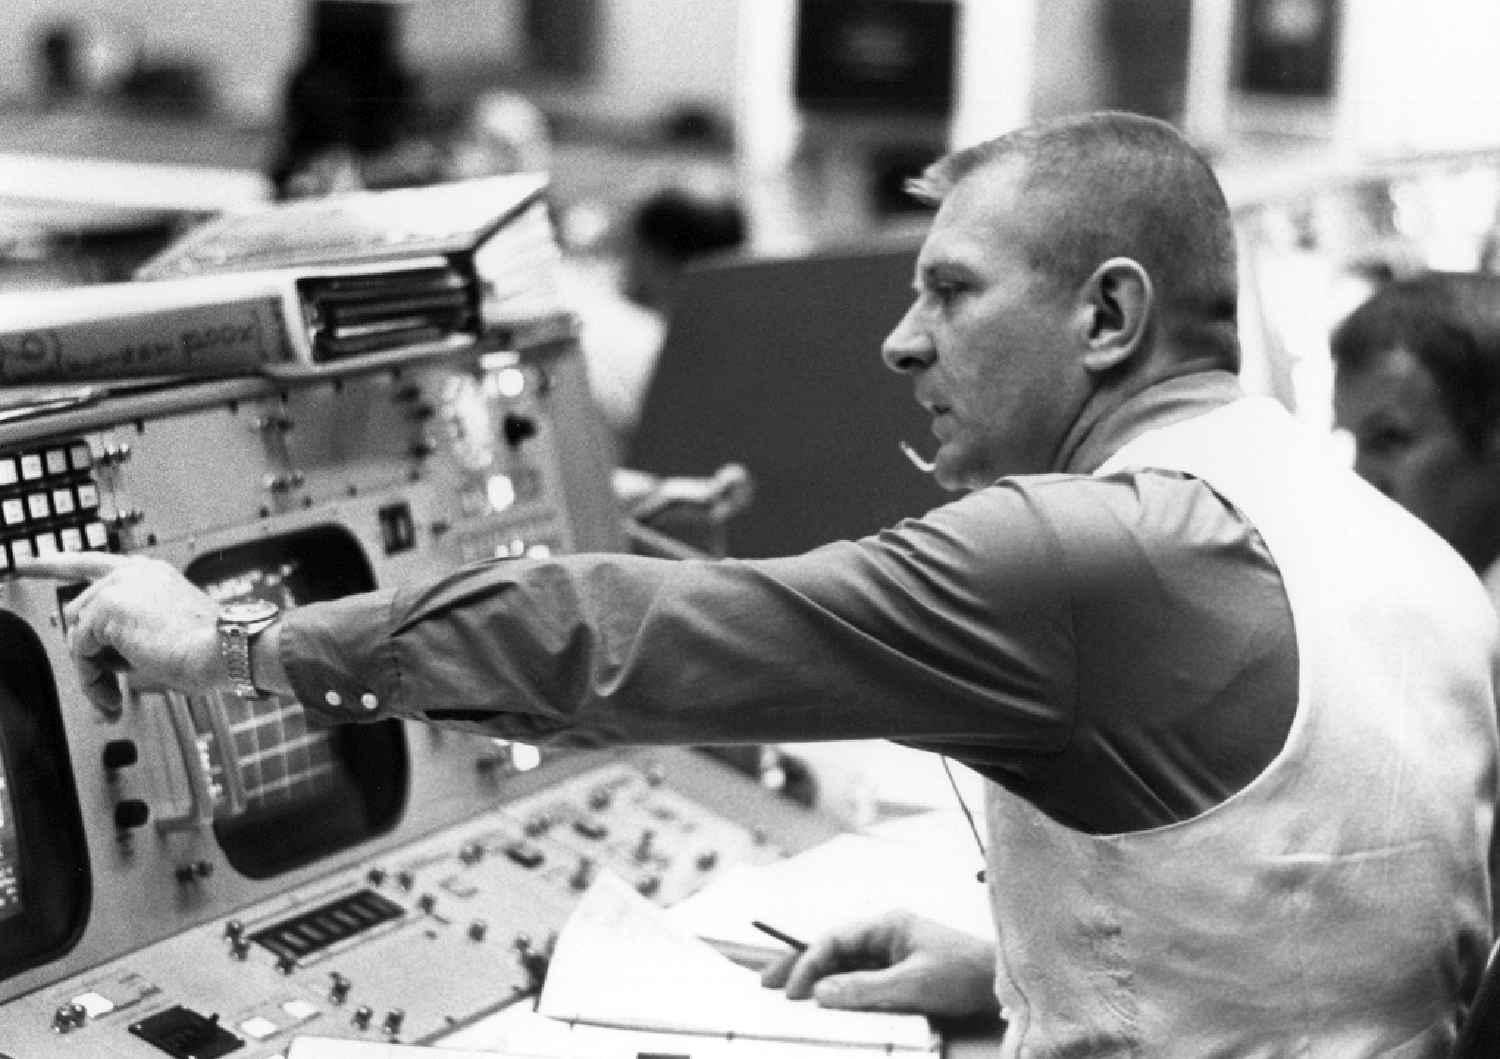 Gene Kranz, best known as the leader of Mission Control flight directors who brought the ill-fated Apollo 13 crew safely back to Earth in April 1970, will speak at Unity Temple on November 5, 2015.